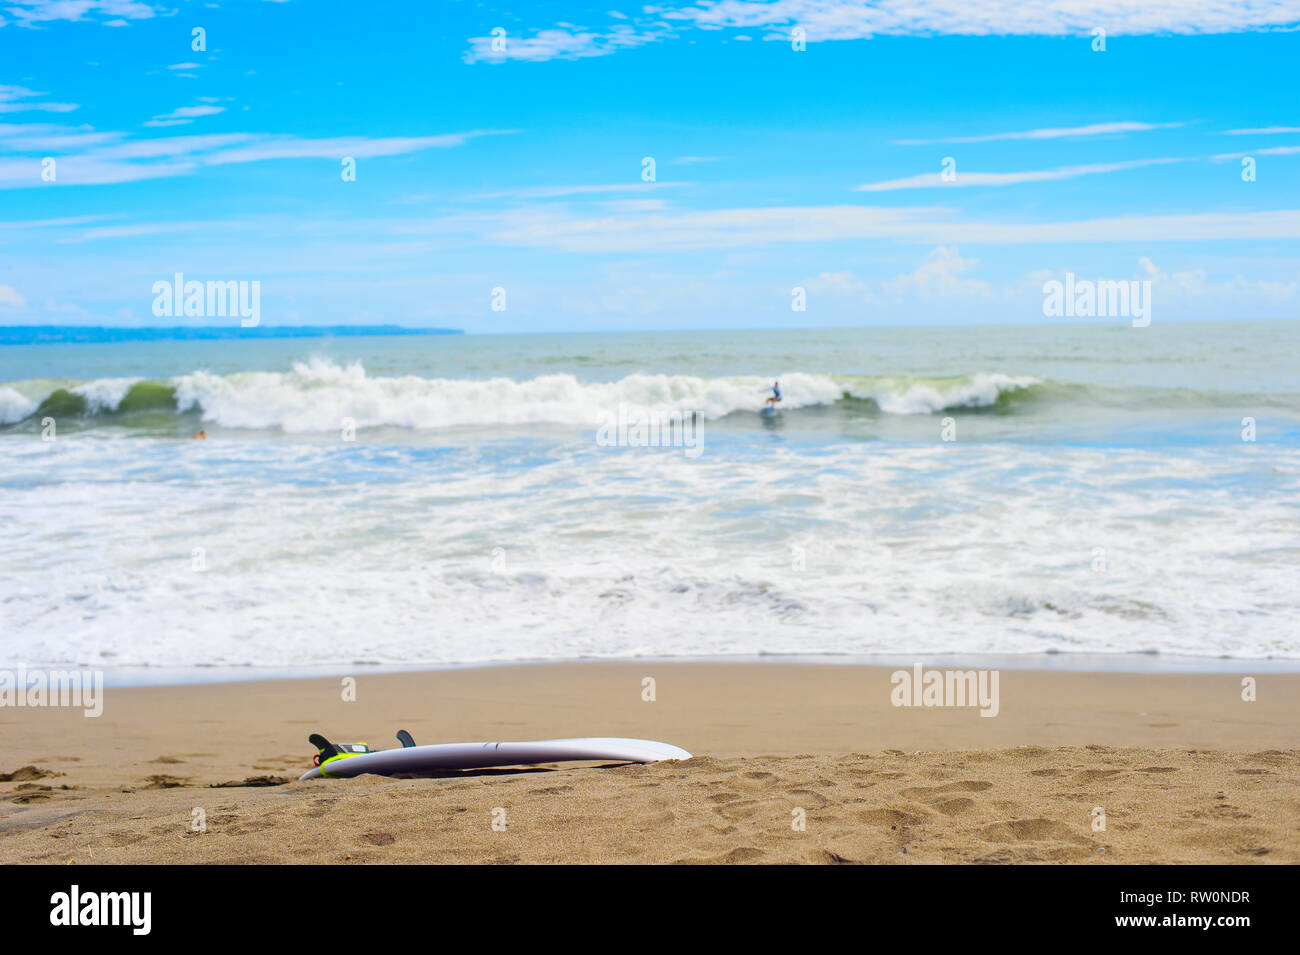 Surfboard on sandy beach, surfer riding on waves in background, Bali, Indonesia Stock Photo